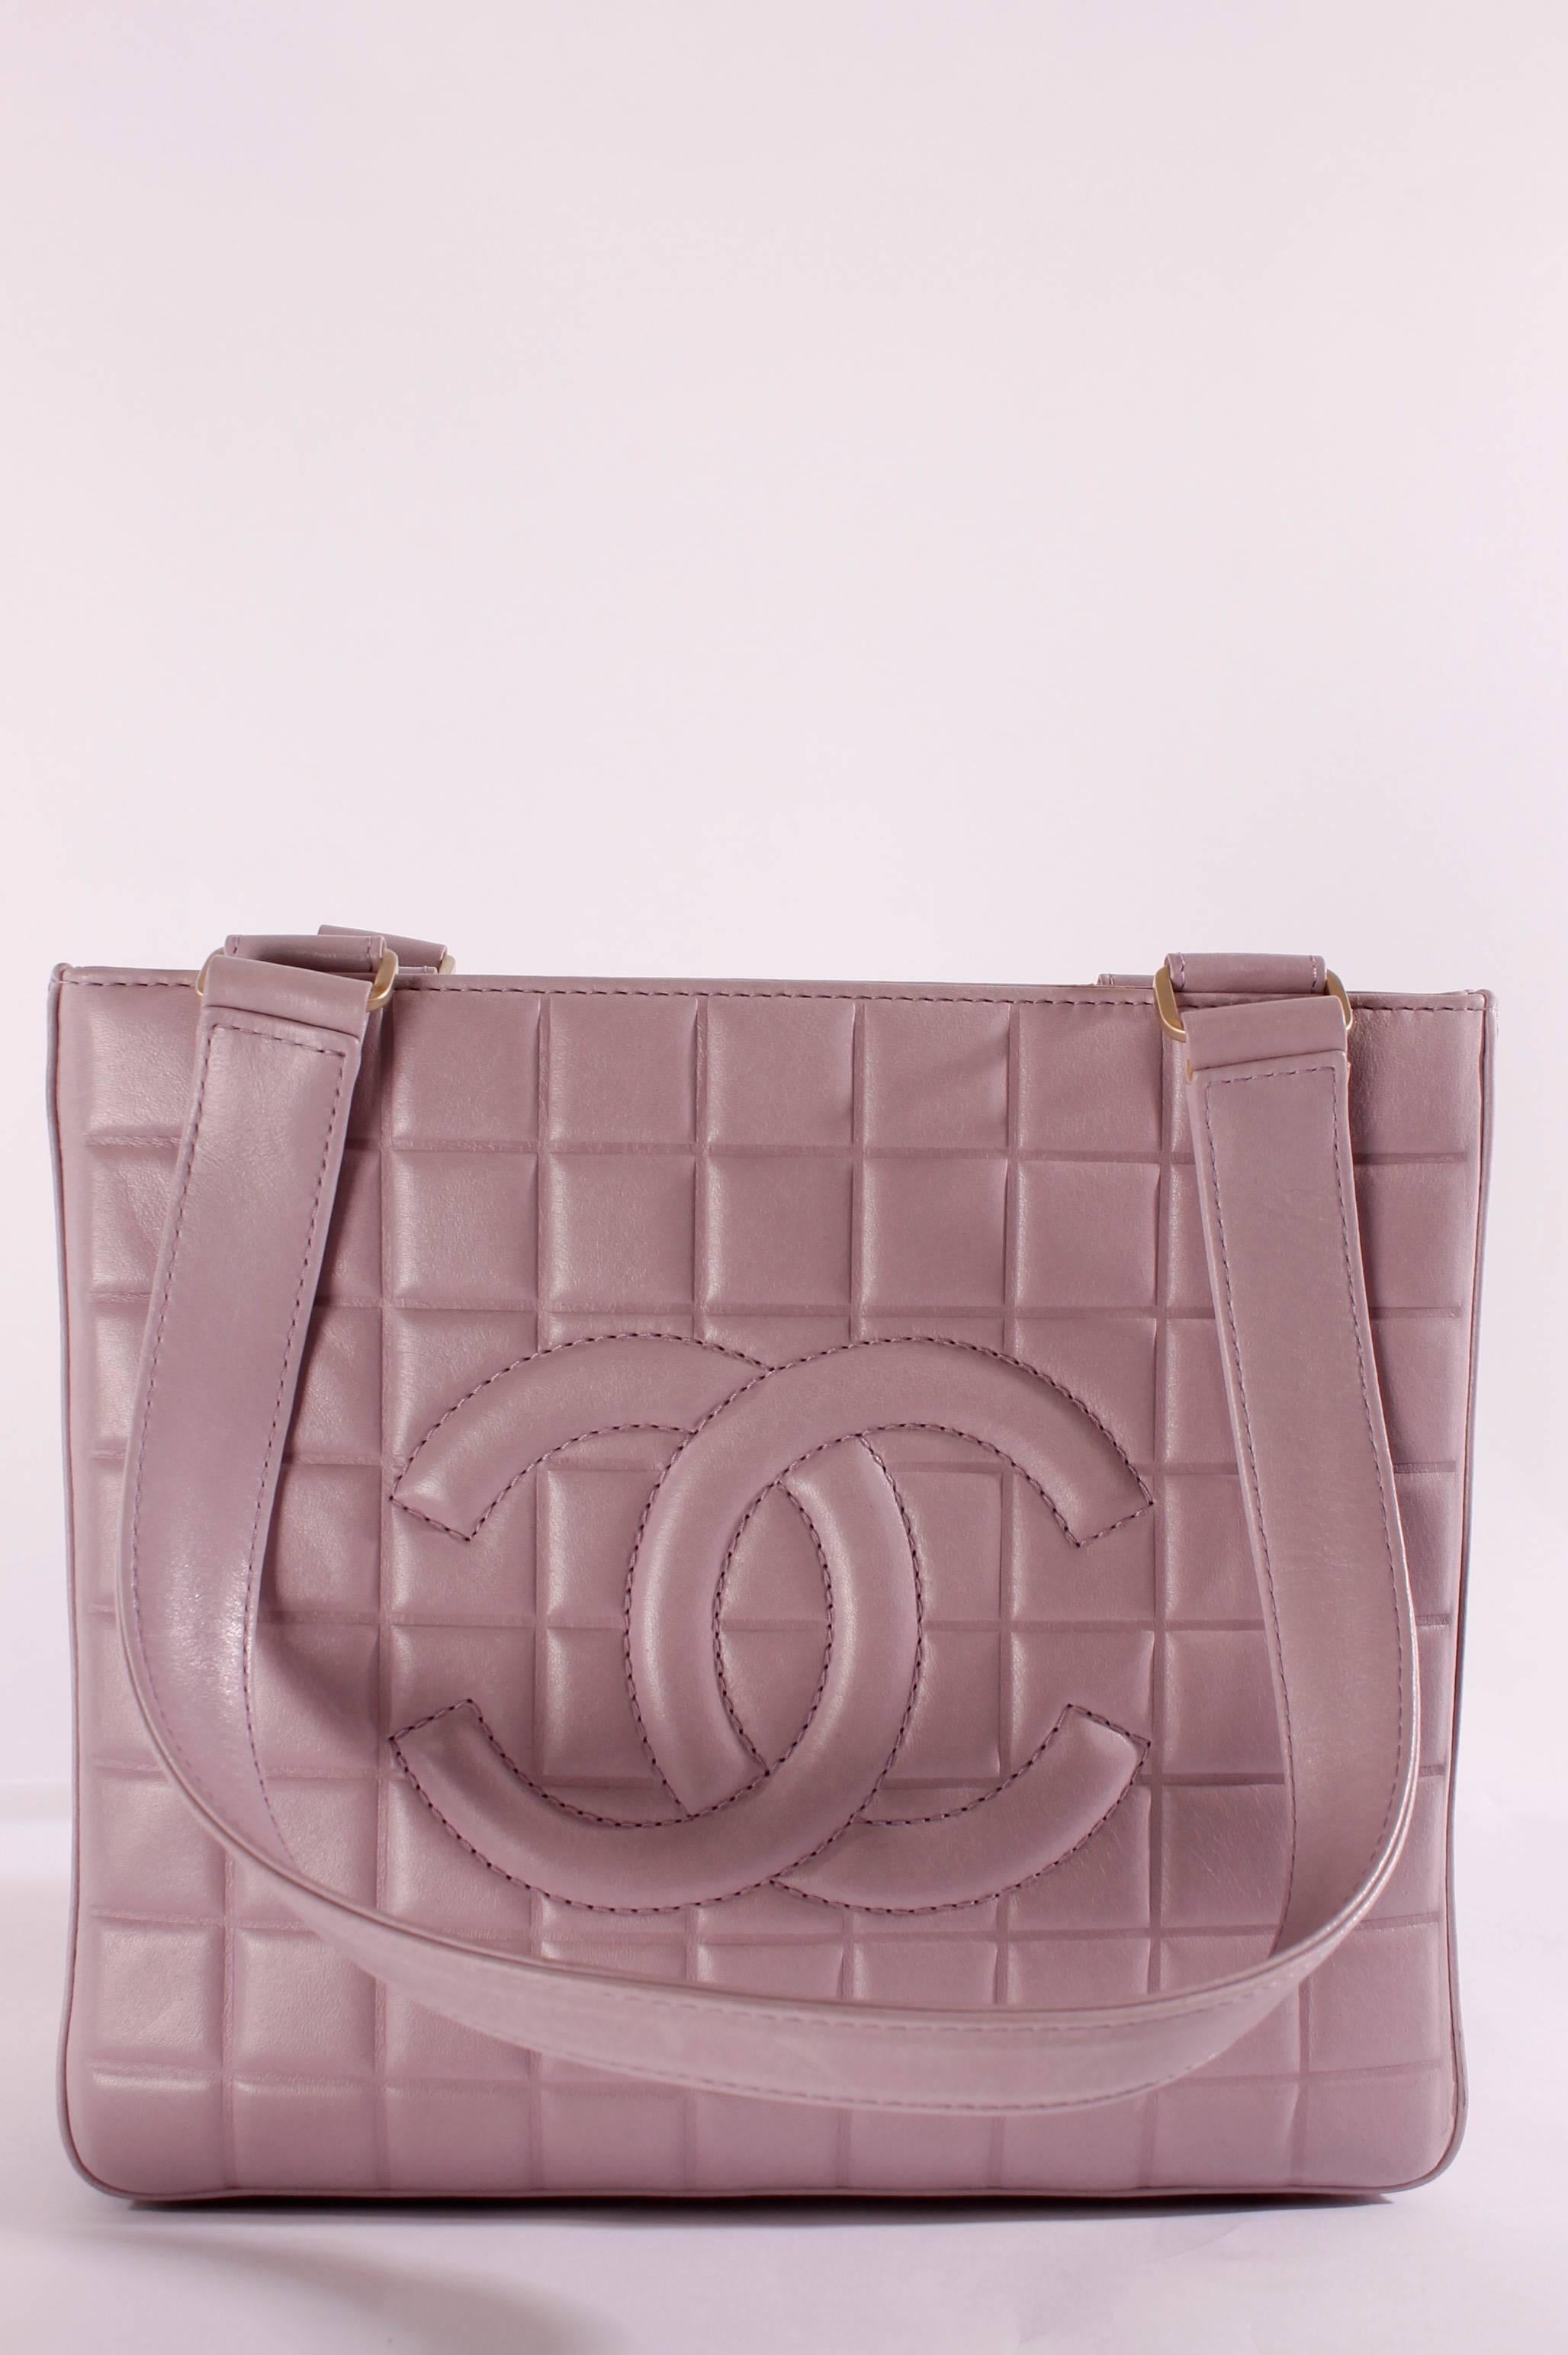 Nice and square lambskin leather handbag made by Chanel in 2002, the color is very light lavender.

This bag closes with a matte golden zipper on top with a CHANEL-dangle hanging down from it, the hardware on the straps is also in matte